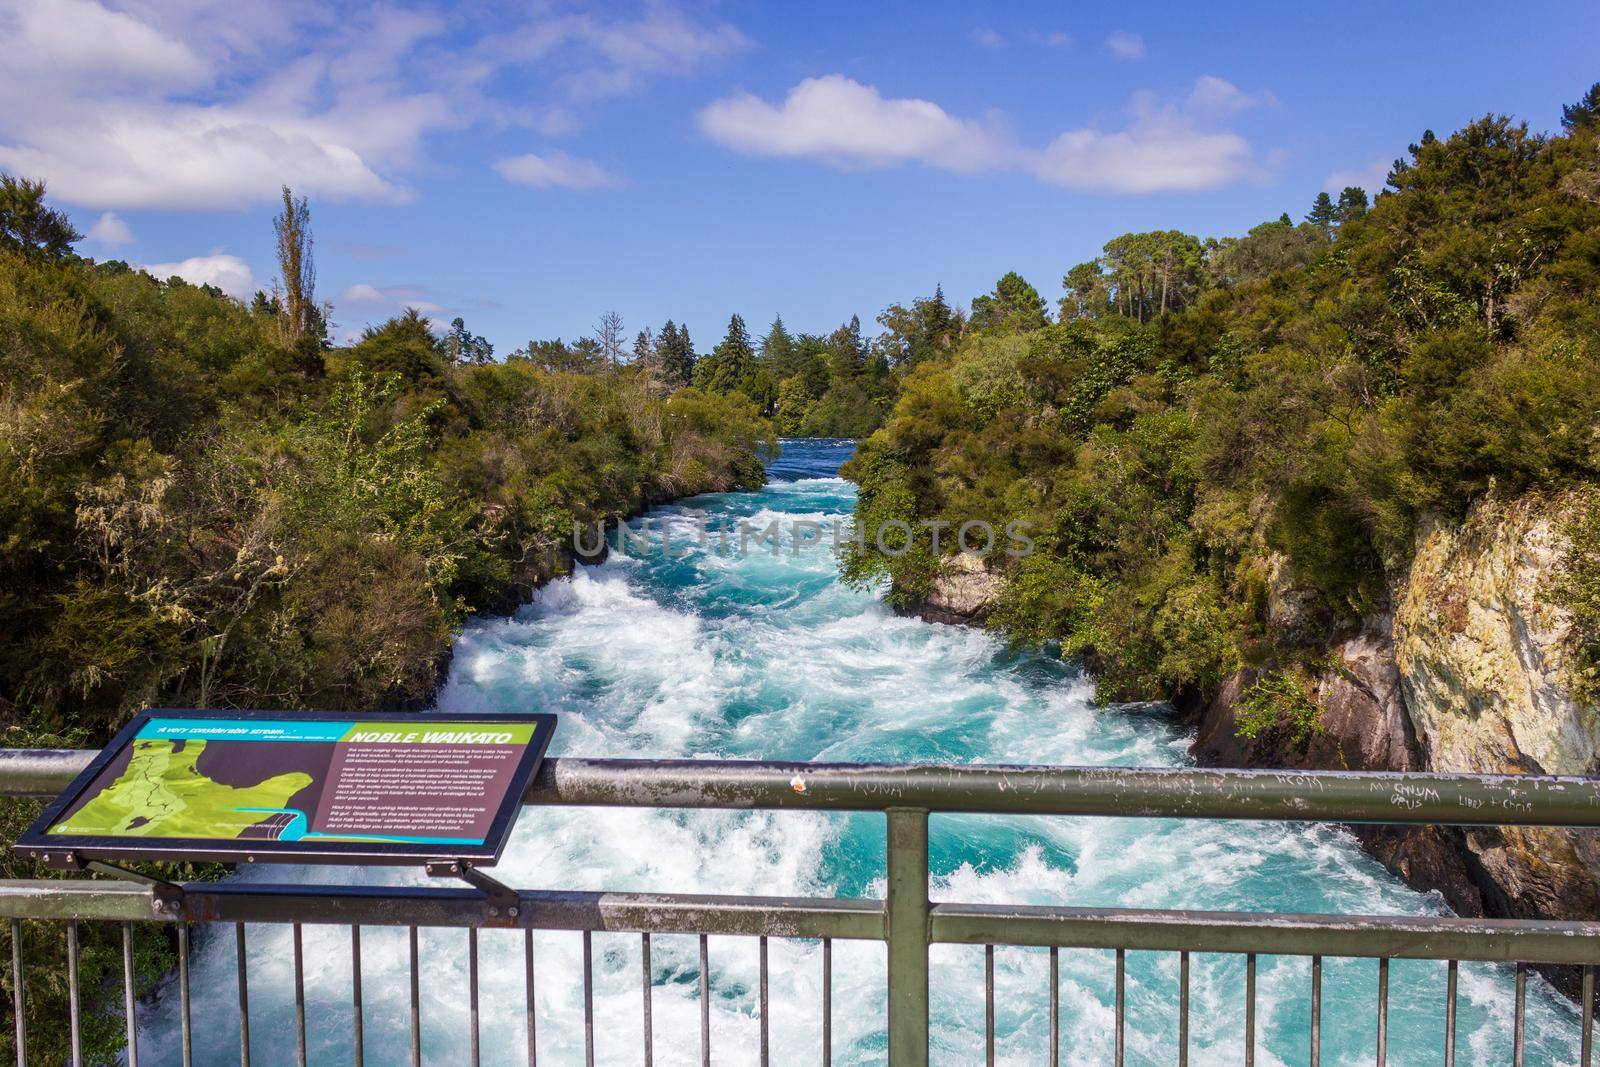 Powerful Huka Falls with a sign with information about the falls, on the Waikato River near Taupo North Island New Zealand by bettercallcurry